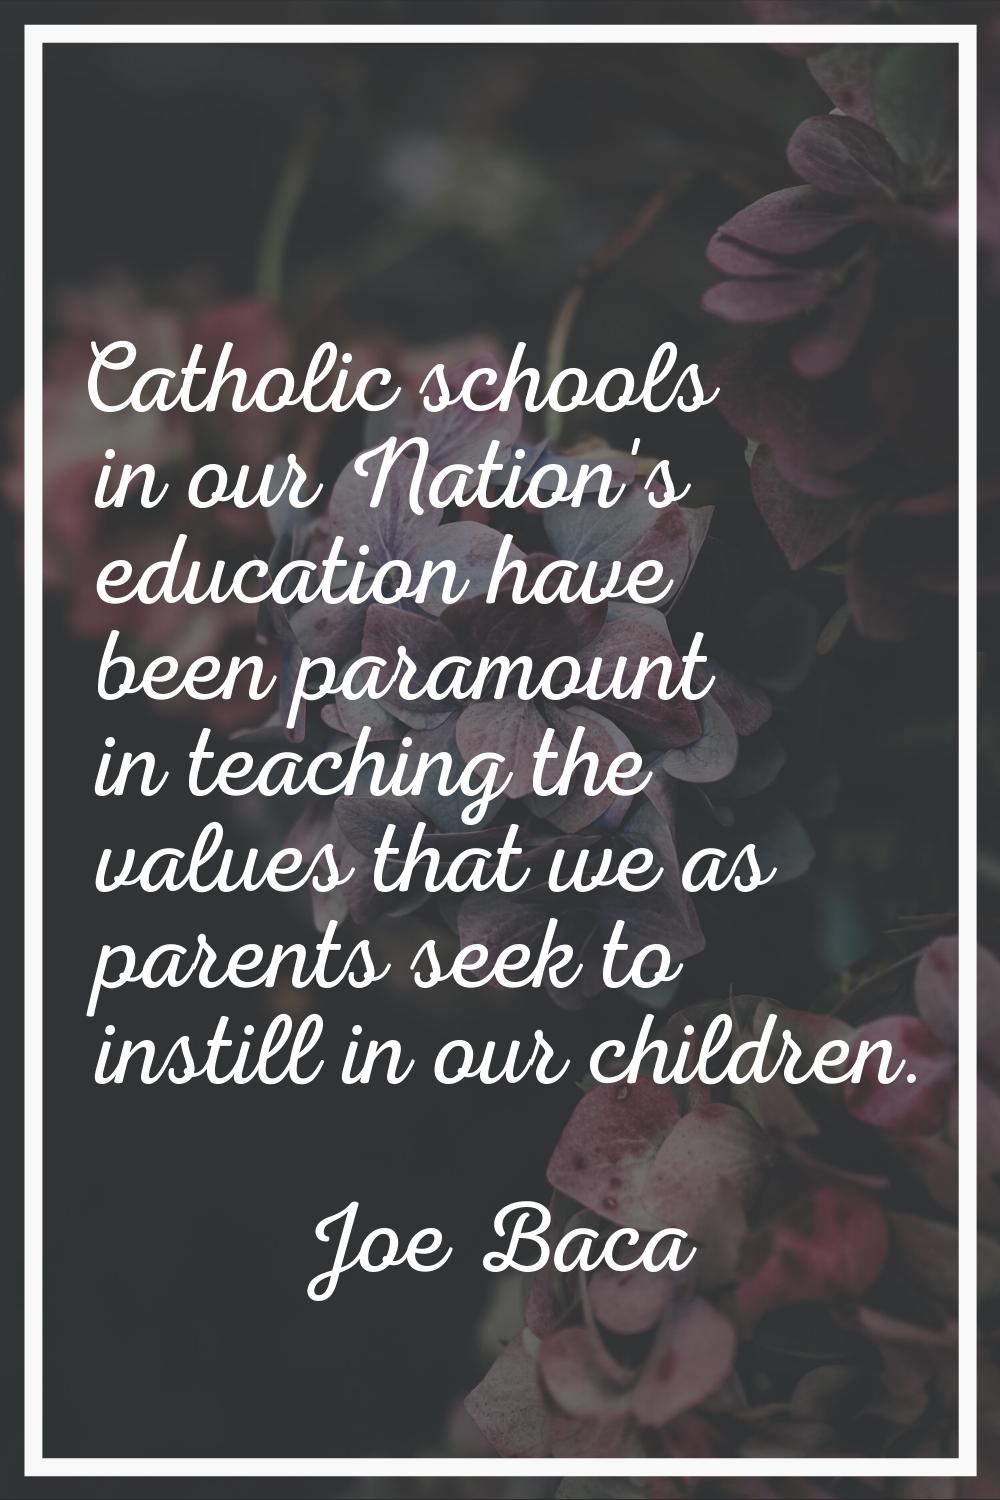 Catholic schools in our Nation's education have been paramount in teaching the values that we as pa